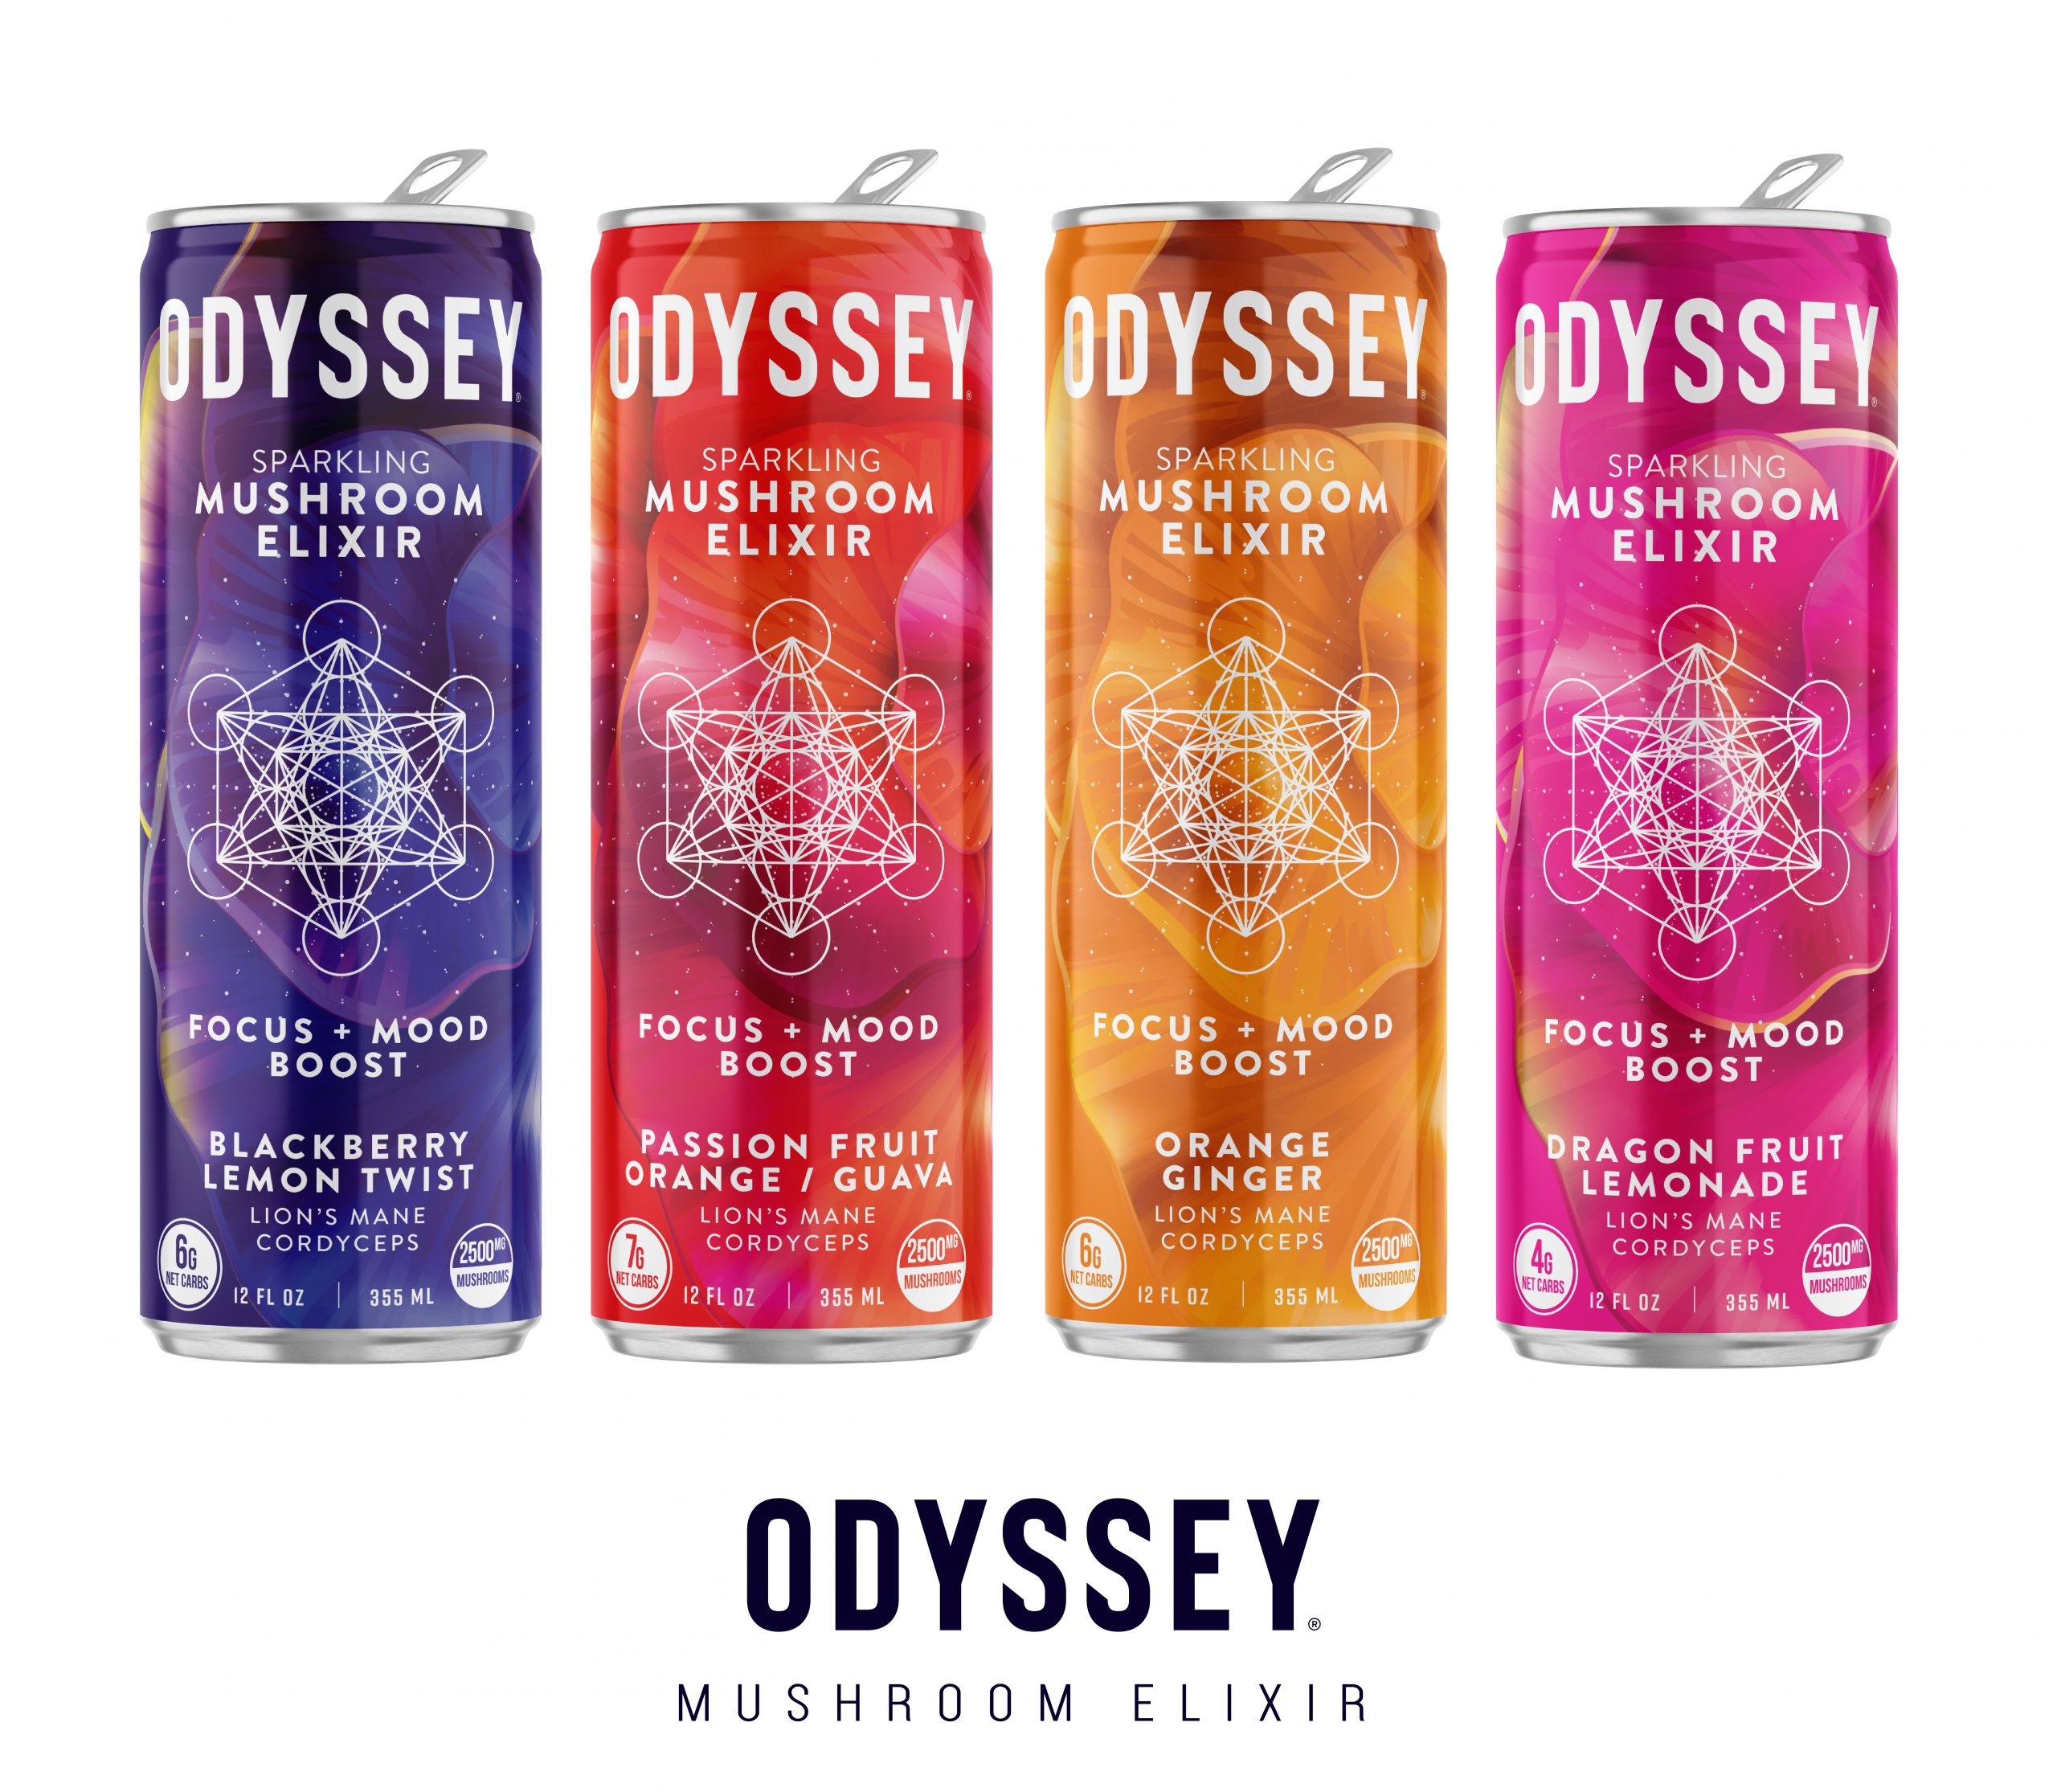 Odyssey Continues to Execute on its Omnichannel Distribution Strategy Launching in GNC Stores, Thrive Market and Fantastic Fungi Forager Box